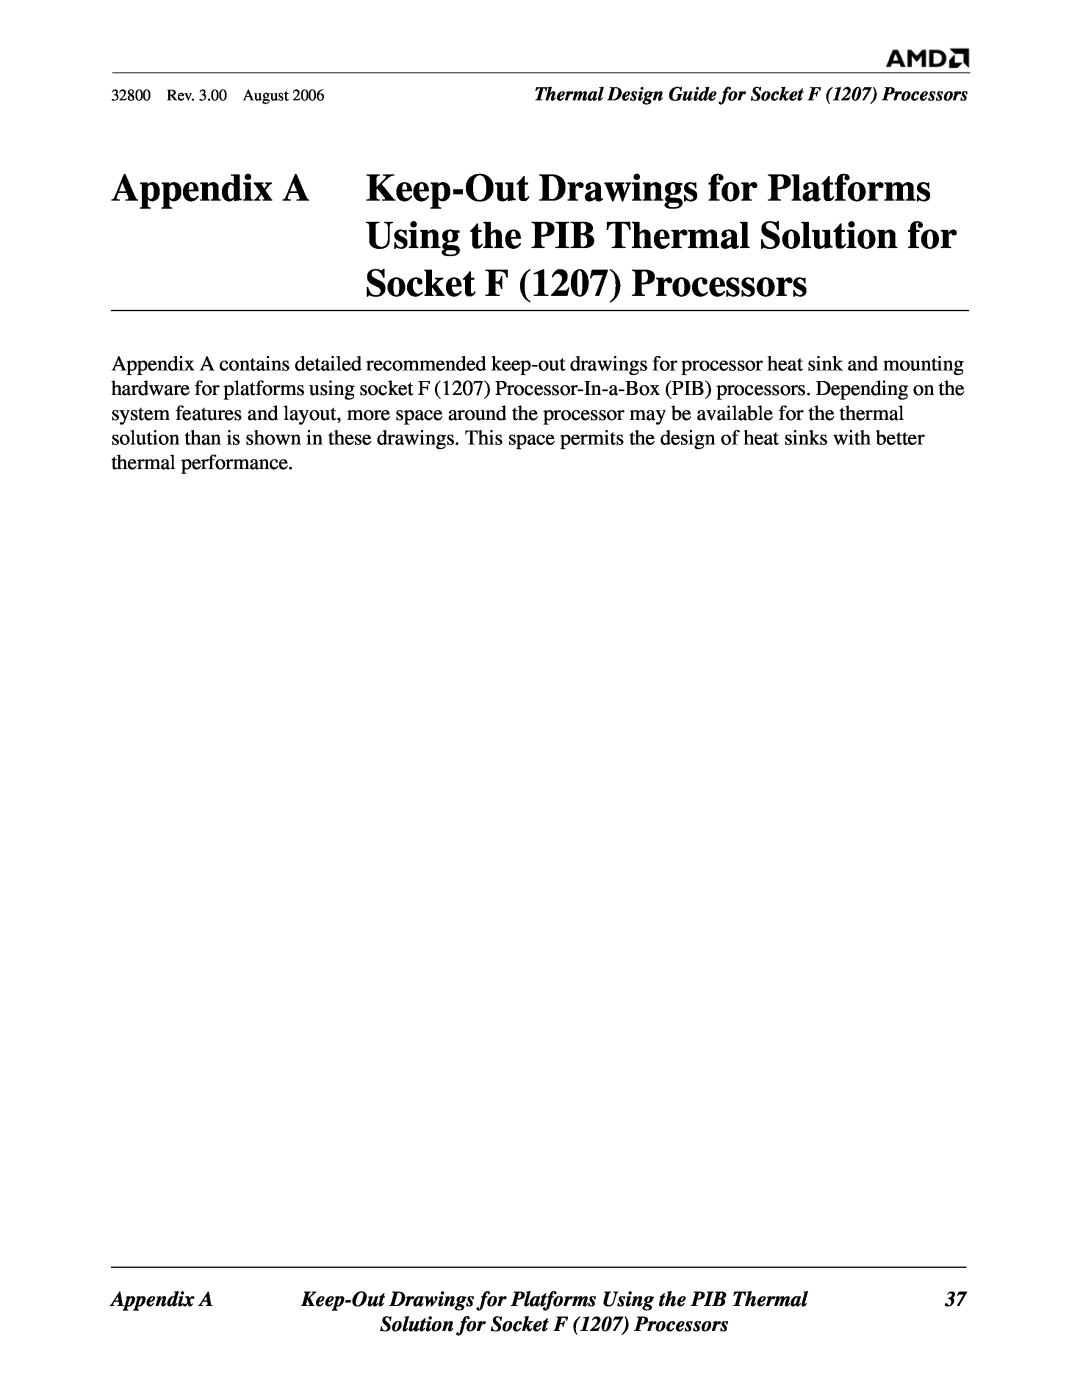 AMD manual Appendix A, Solution for Socket F 1207 Processors, Keep-Out Drawings for Platforms Using the PIB Thermal 